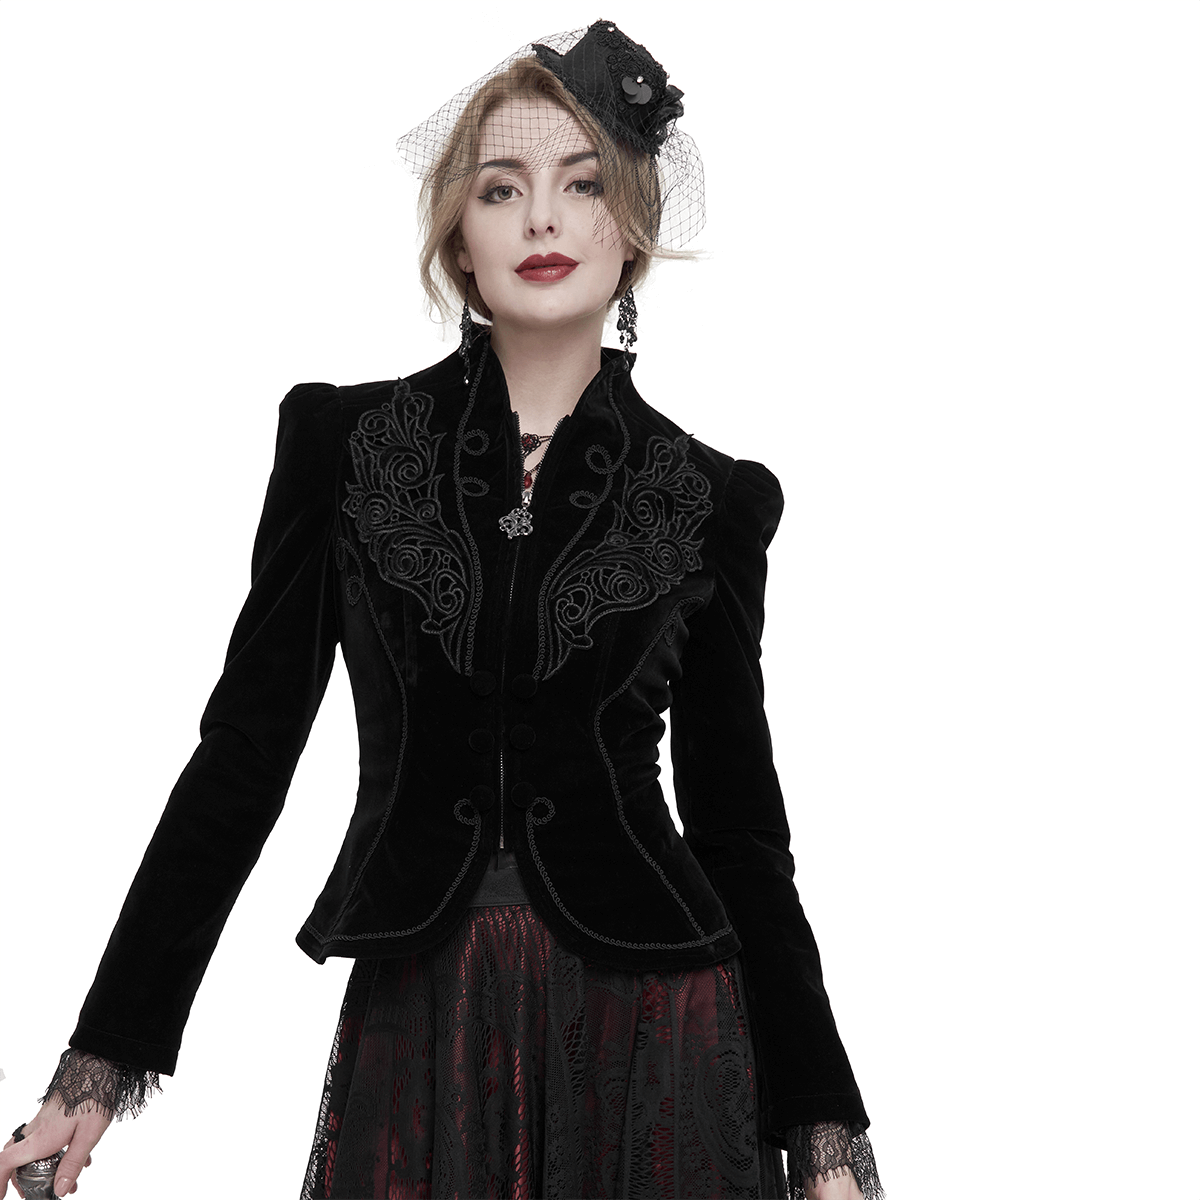 Gothic Velvet Zipper Black Jacket for Women / Vintage Jacket with Lace Applique and Decorative Buttons - HARD'N'HEAVY